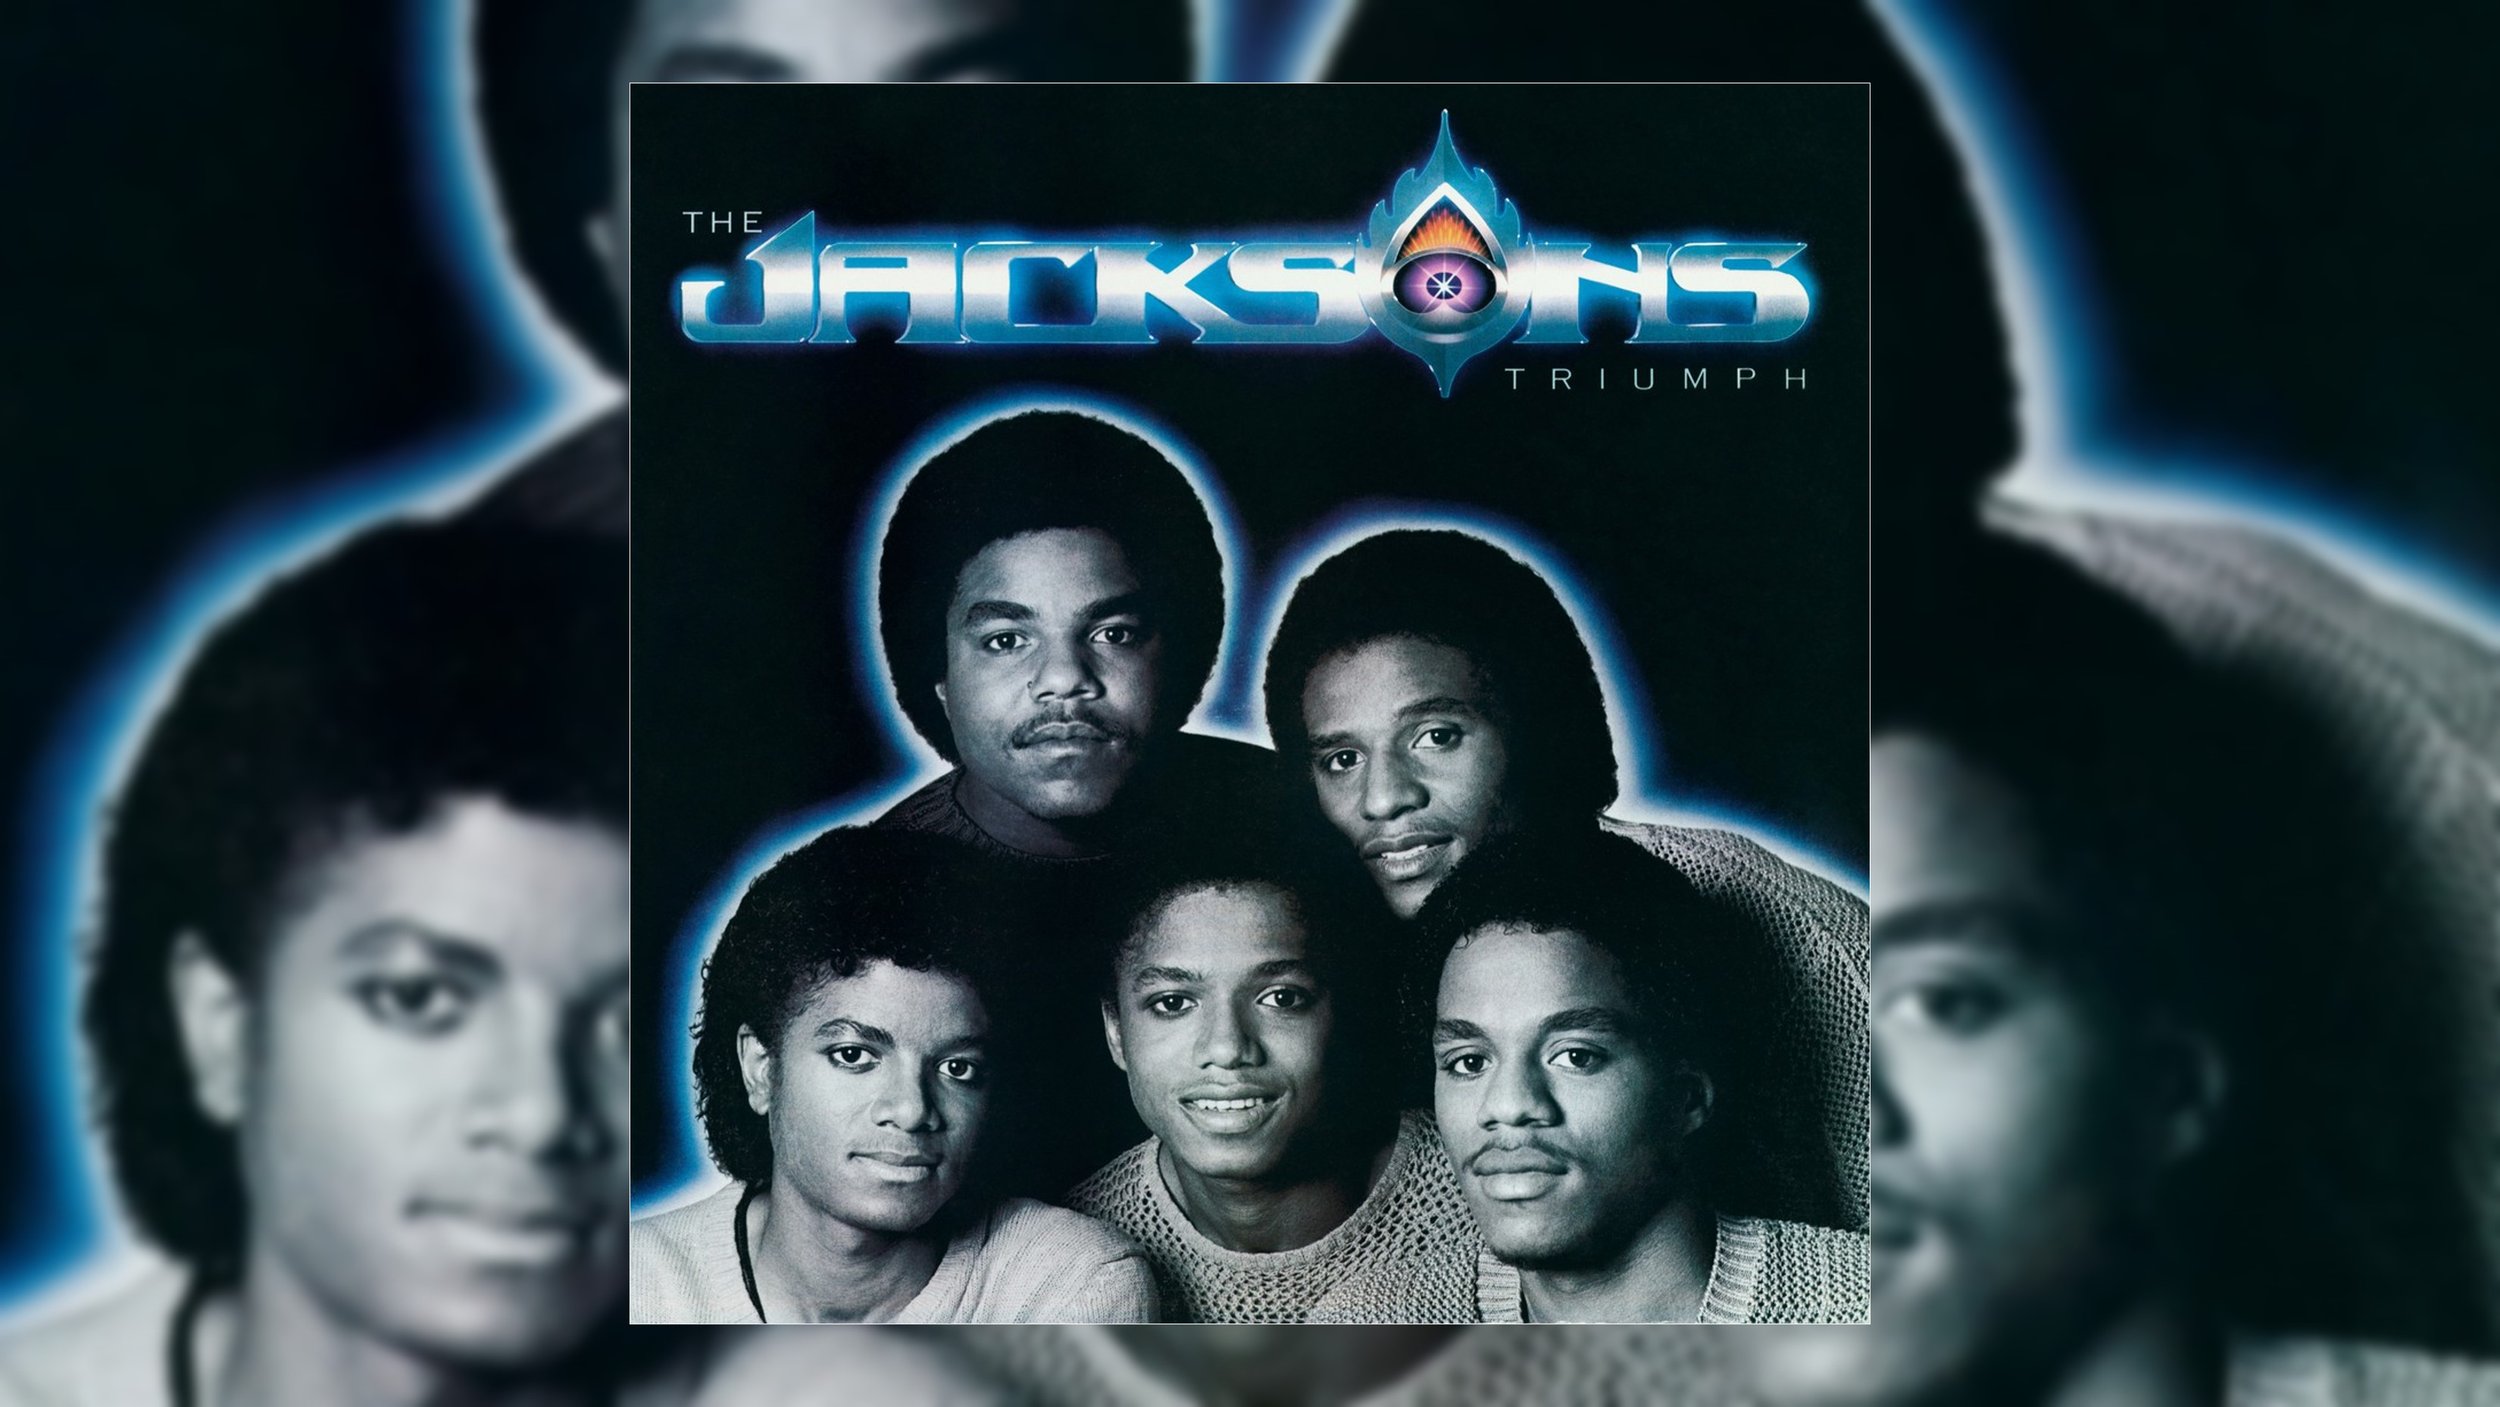 Revisiting The Jacksons ‘triumph 1980 Tribute